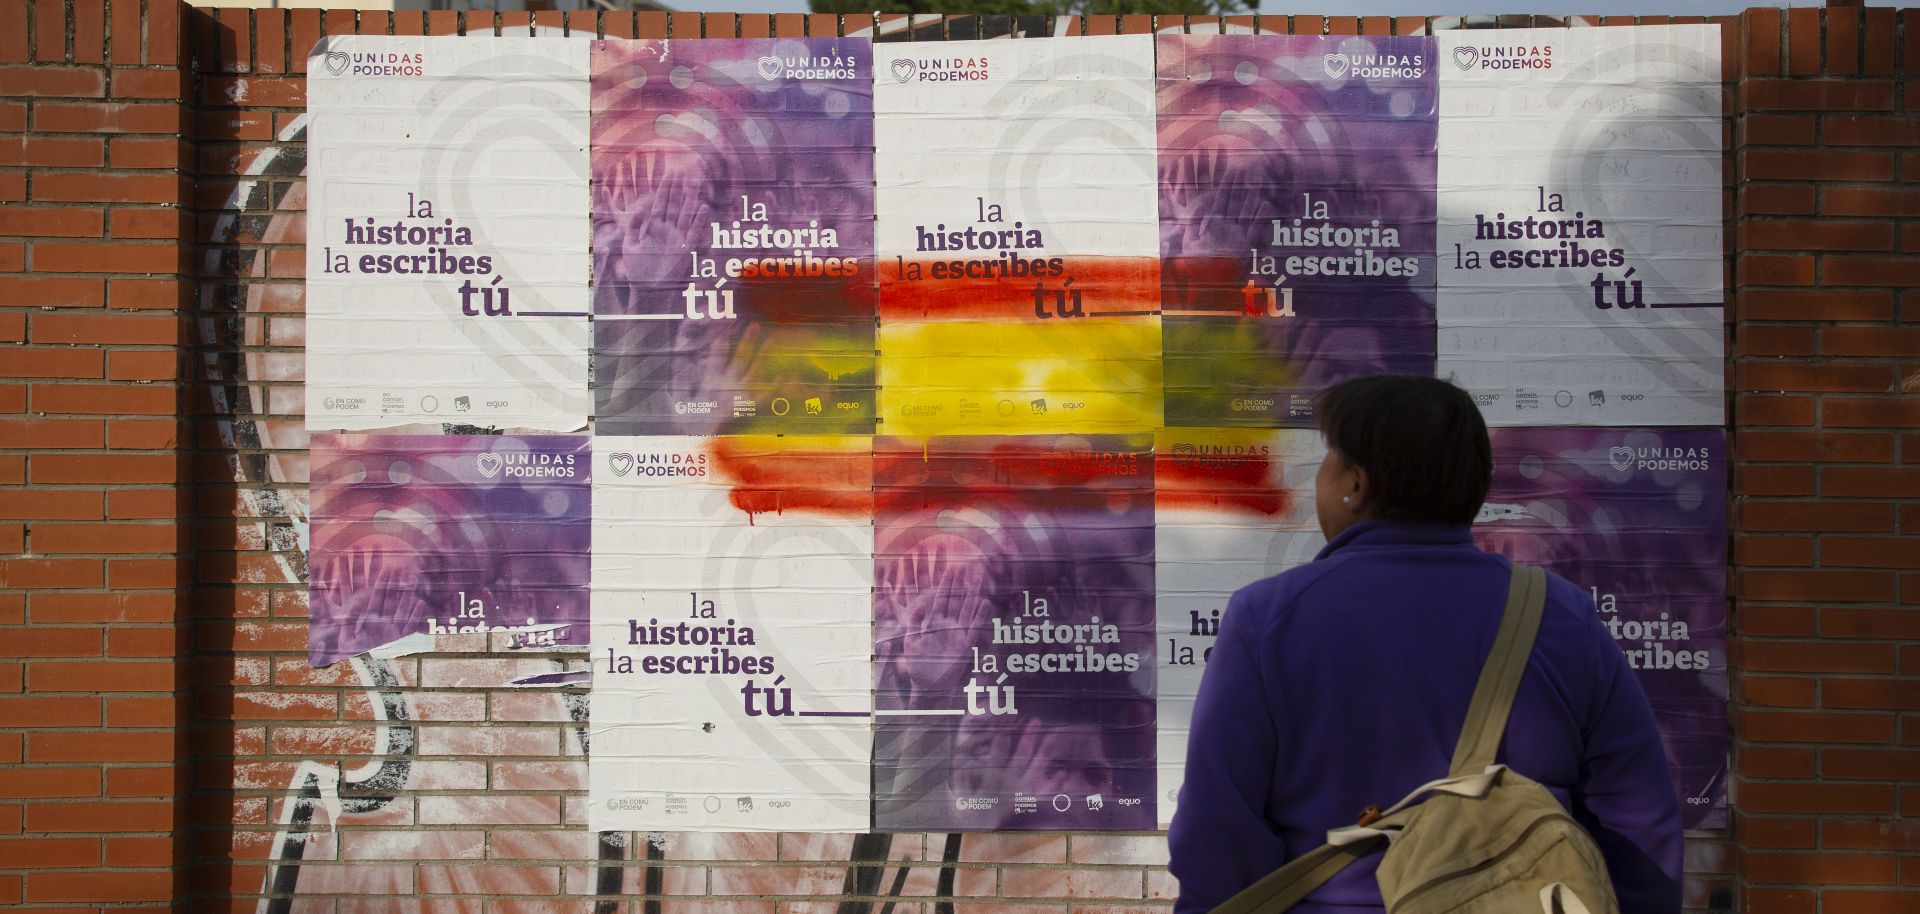 A woman in Seville, Spain, looks at election posters for the United We Can (Unidas Podemos) party on April 22, 2019.